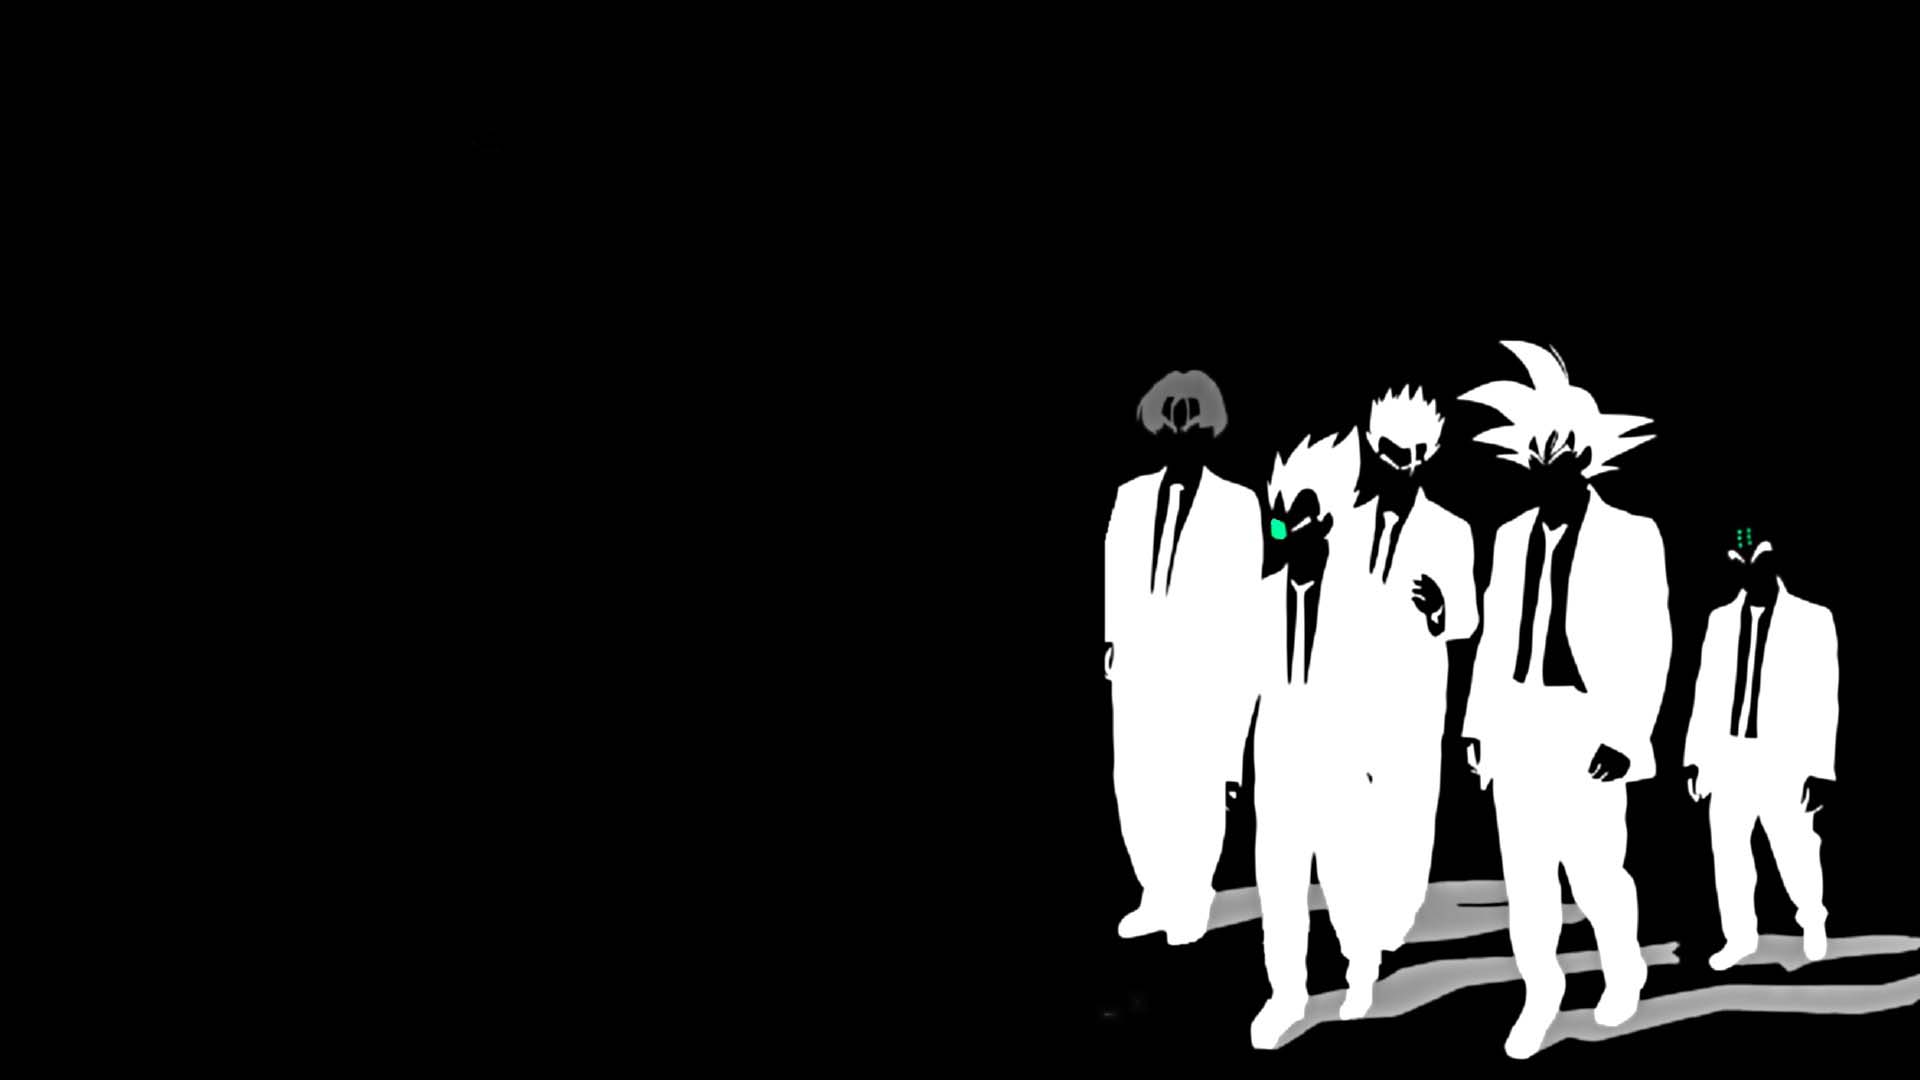 Dbz Characters In Suits Silhouette HD Wallpaper | 1920x1080 | ID:49201